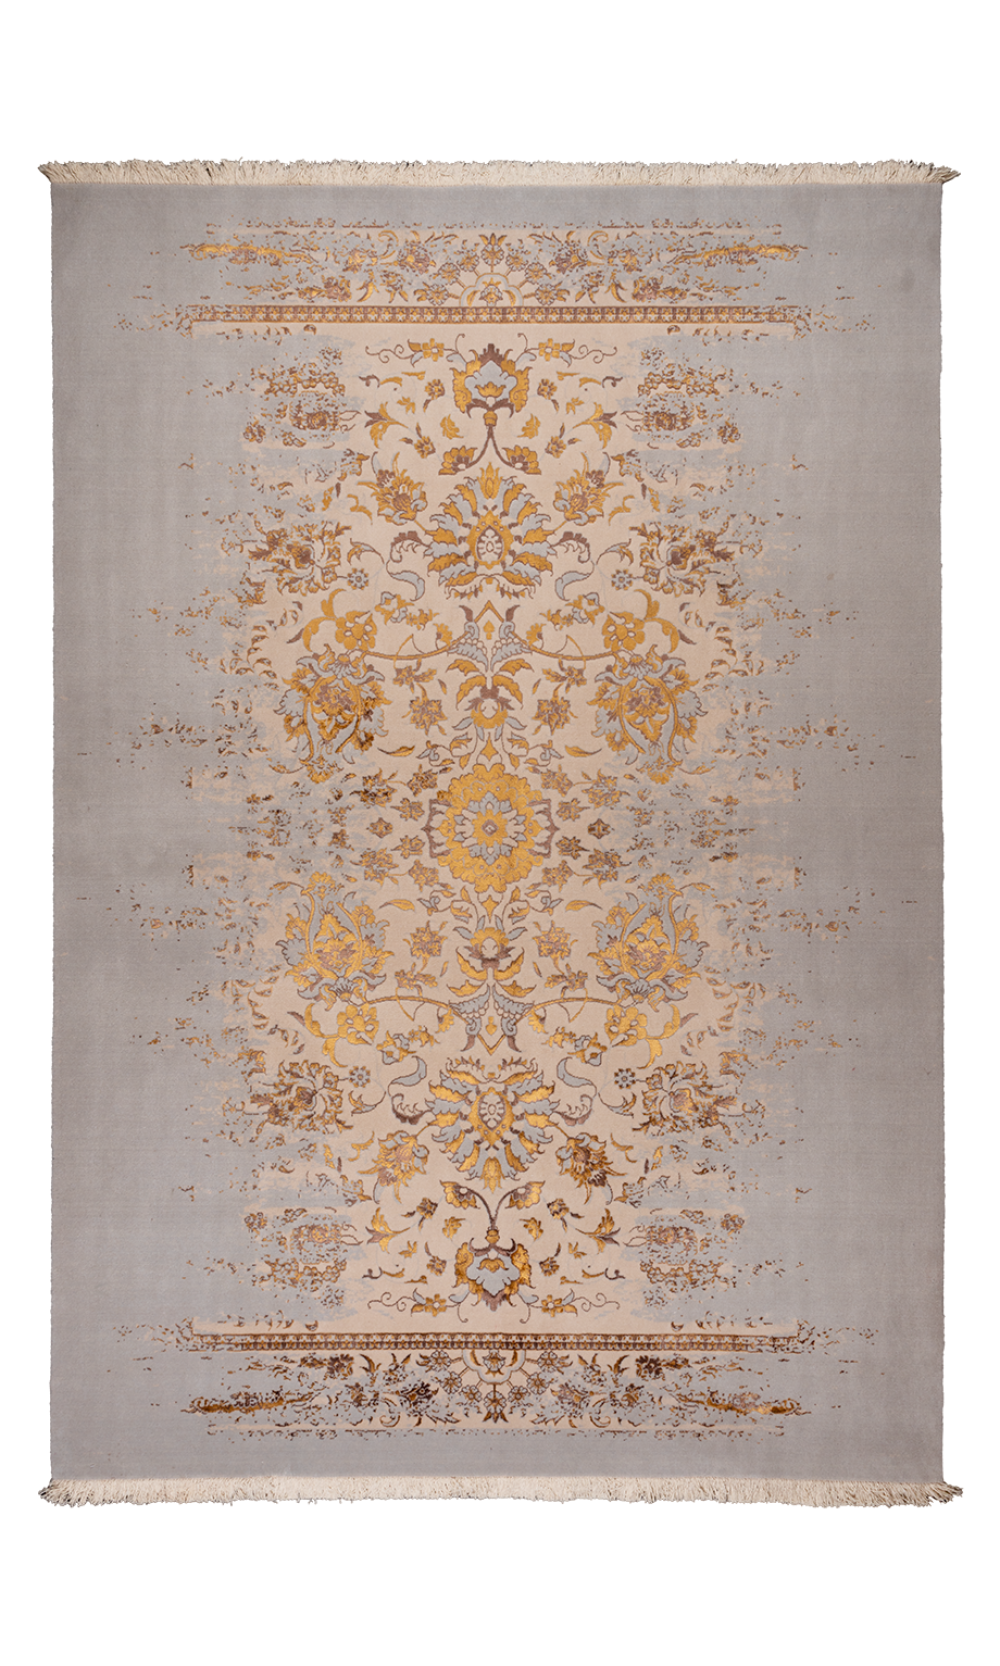 Gold Flower | Machin made Rug In Wool cream & gold color |PARSIRUG.COM